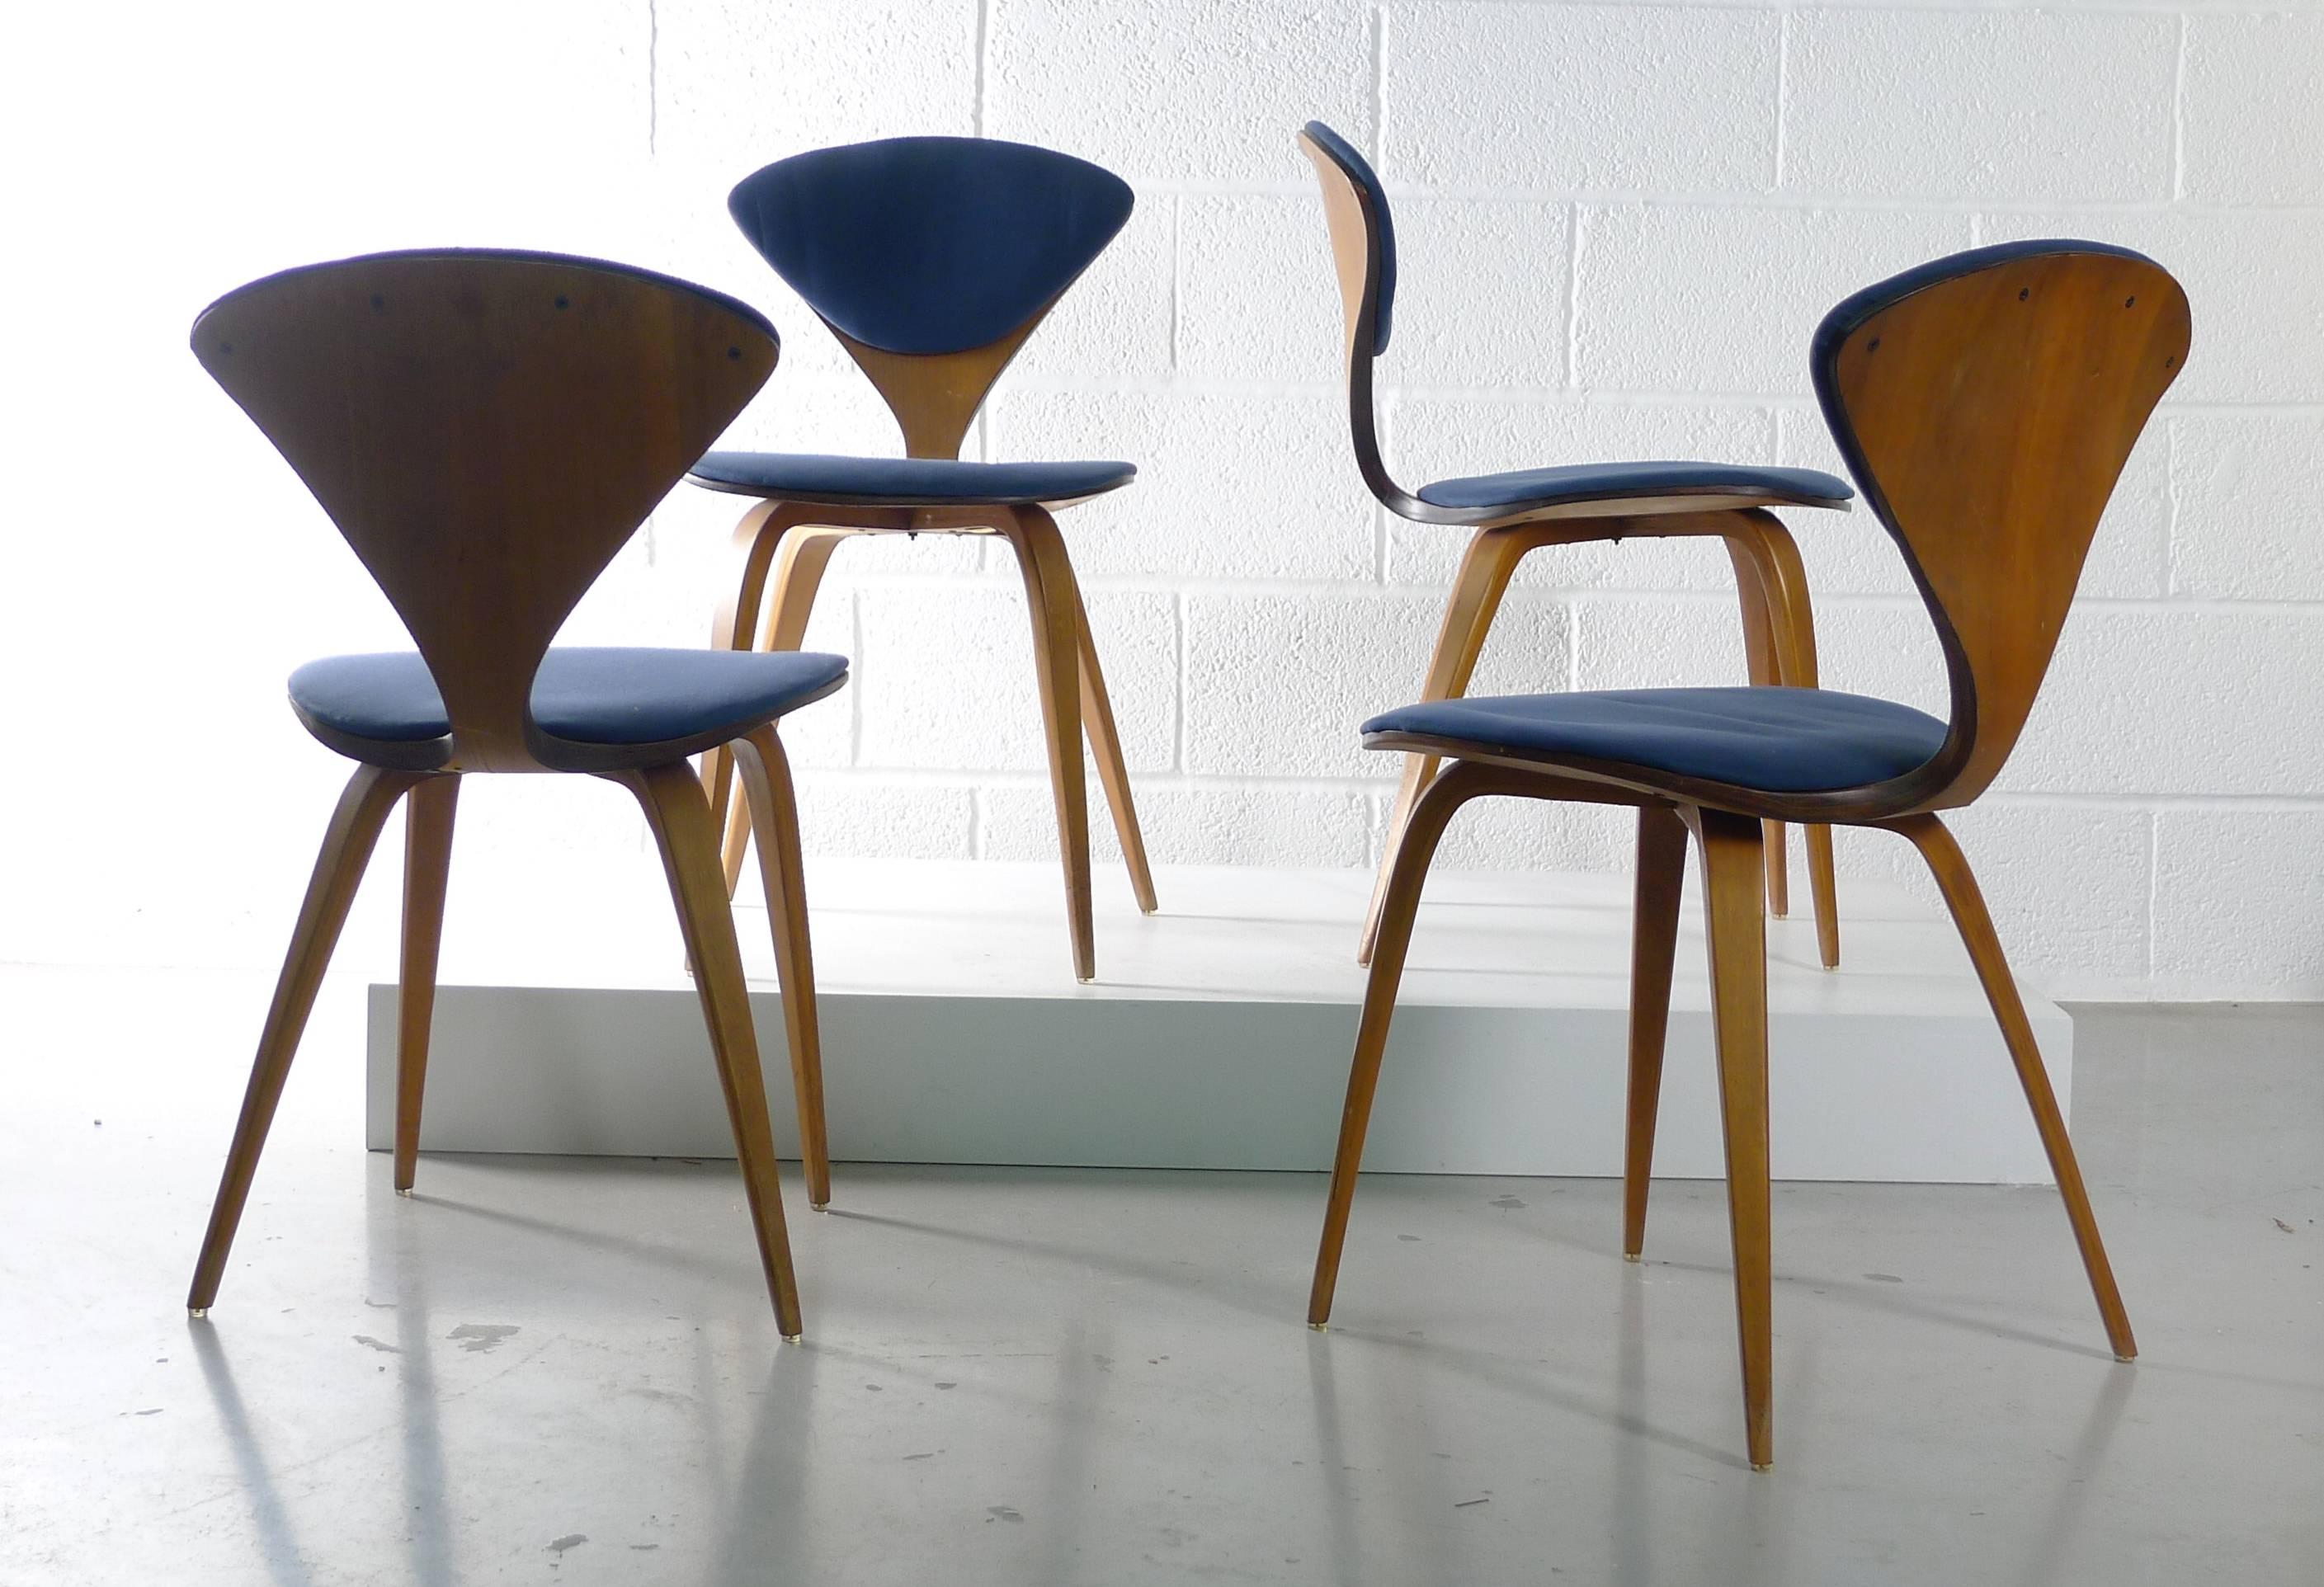 Norman Cherner for Plycraft , Mass , USA. Designed circa 1957 these examples are from the early to mid-1960s. Moulded plywood framework with blue upholstered seats and backs .
Each chair retains its original foot glides and each has a full Plycraft